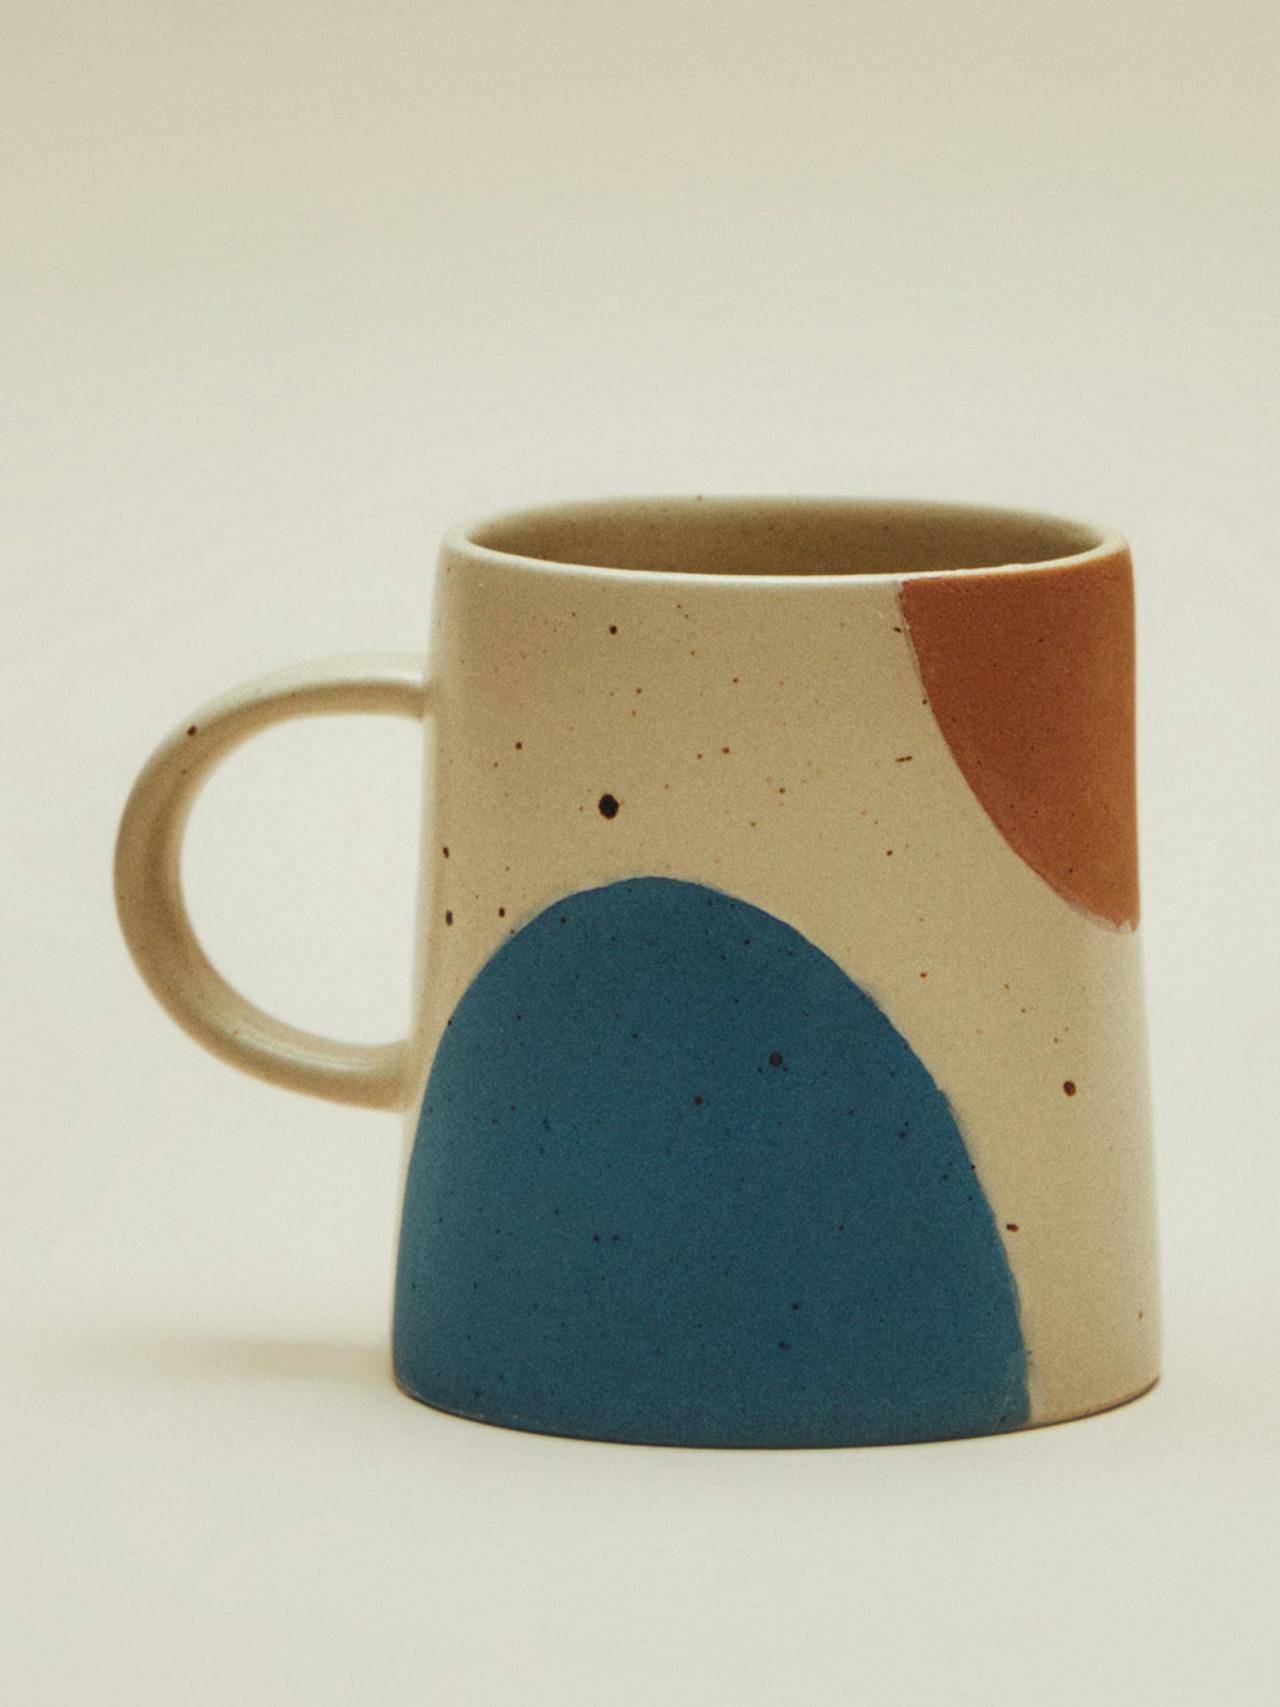 Stoneware mug with speckles